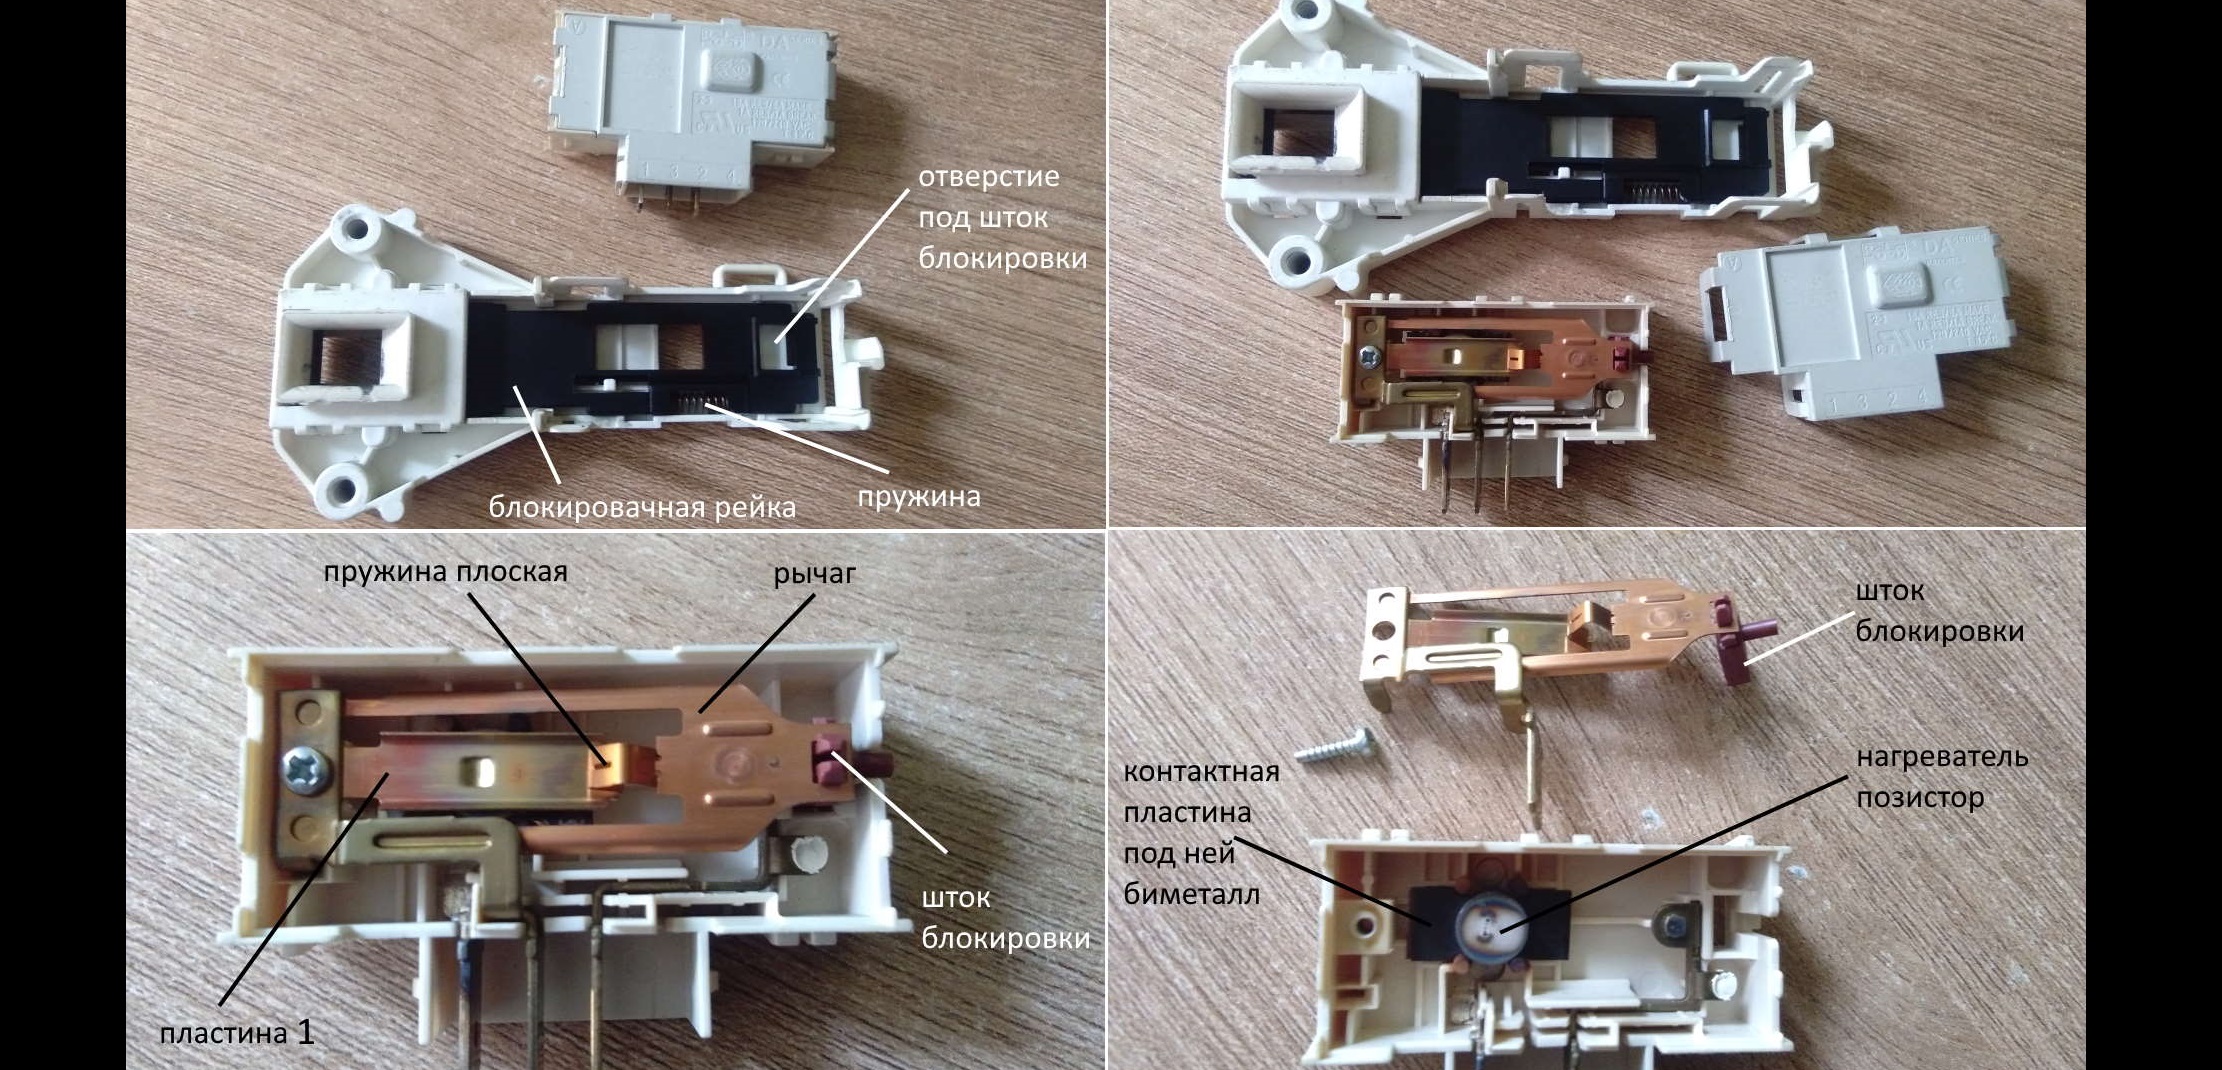 components of the control module